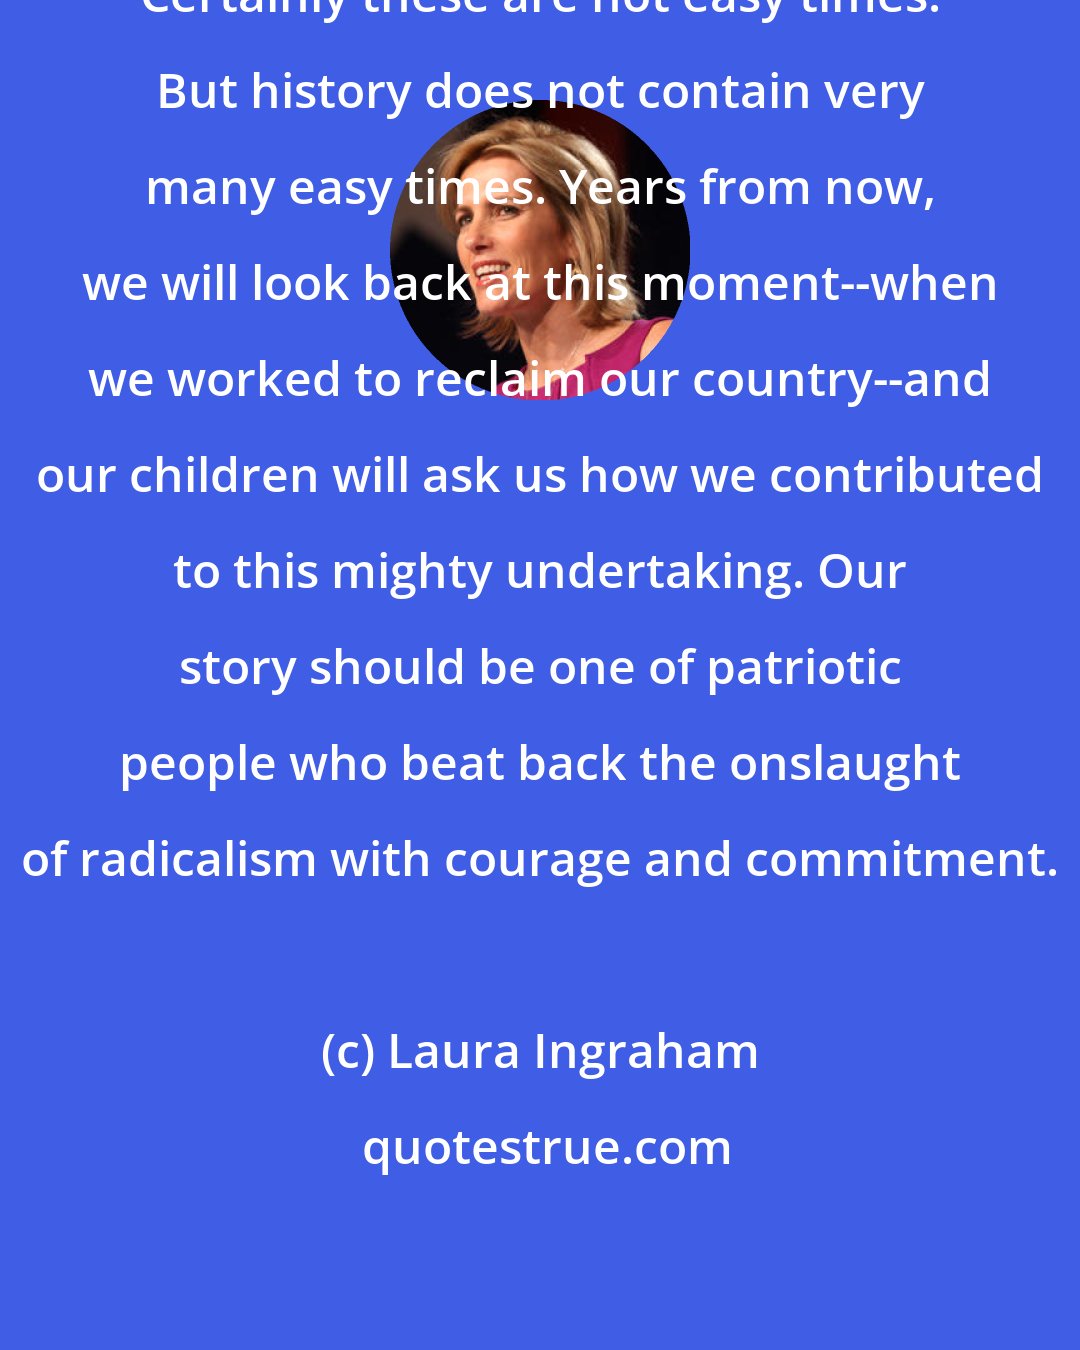 Laura Ingraham: Certainly these are not easy times. But history does not contain very many easy times. Years from now, we will look back at this moment--when we worked to reclaim our country--and our children will ask us how we contributed to this mighty undertaking. Our story should be one of patriotic people who beat back the onslaught of radicalism with courage and commitment.